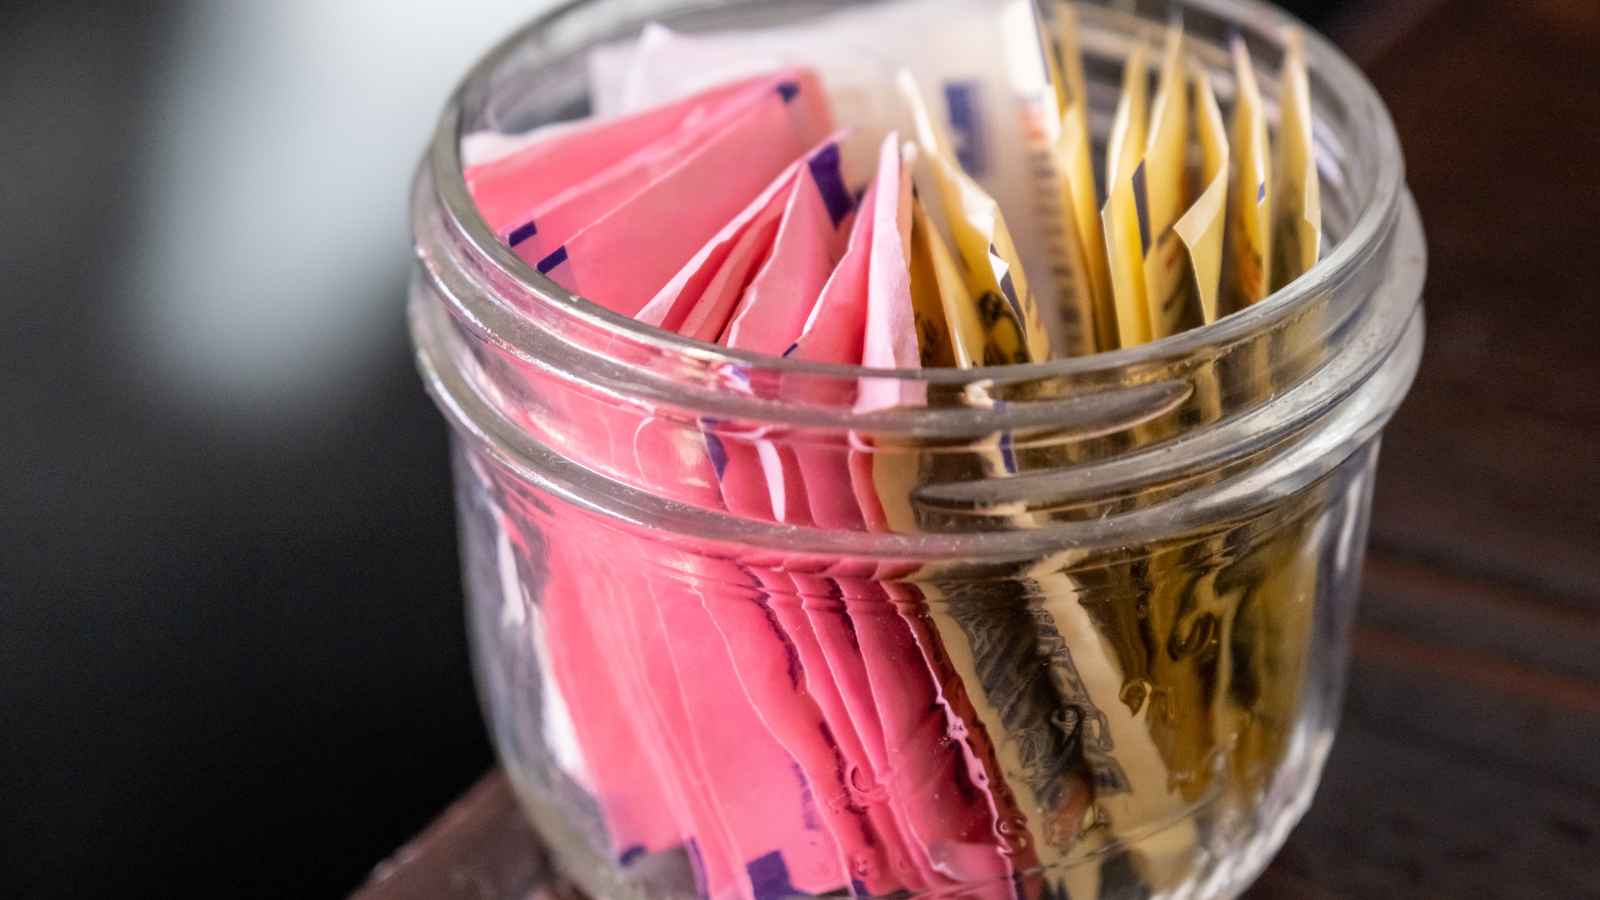 <p>Many people turn to artificial sweeteners to cut calories, but these substitutes don’t come without a cost.  Some studies suggest they can increase preference for sweet tastes, which may lead to overeating sweet foods. A study in JAMA found a link between consuming artificial sweeteners and a higher risk of high blood pressure, diabetes, and heart disease.</p><p>The key is moderation. Limit intake to only a few packets daily. You can also use natural sweeteners like stevia or small portions of pure honey or maple syrup as safer substitutes. Alternatively, you can gradually reduce sugar intake to adapt to a less-sweet diet.</p>